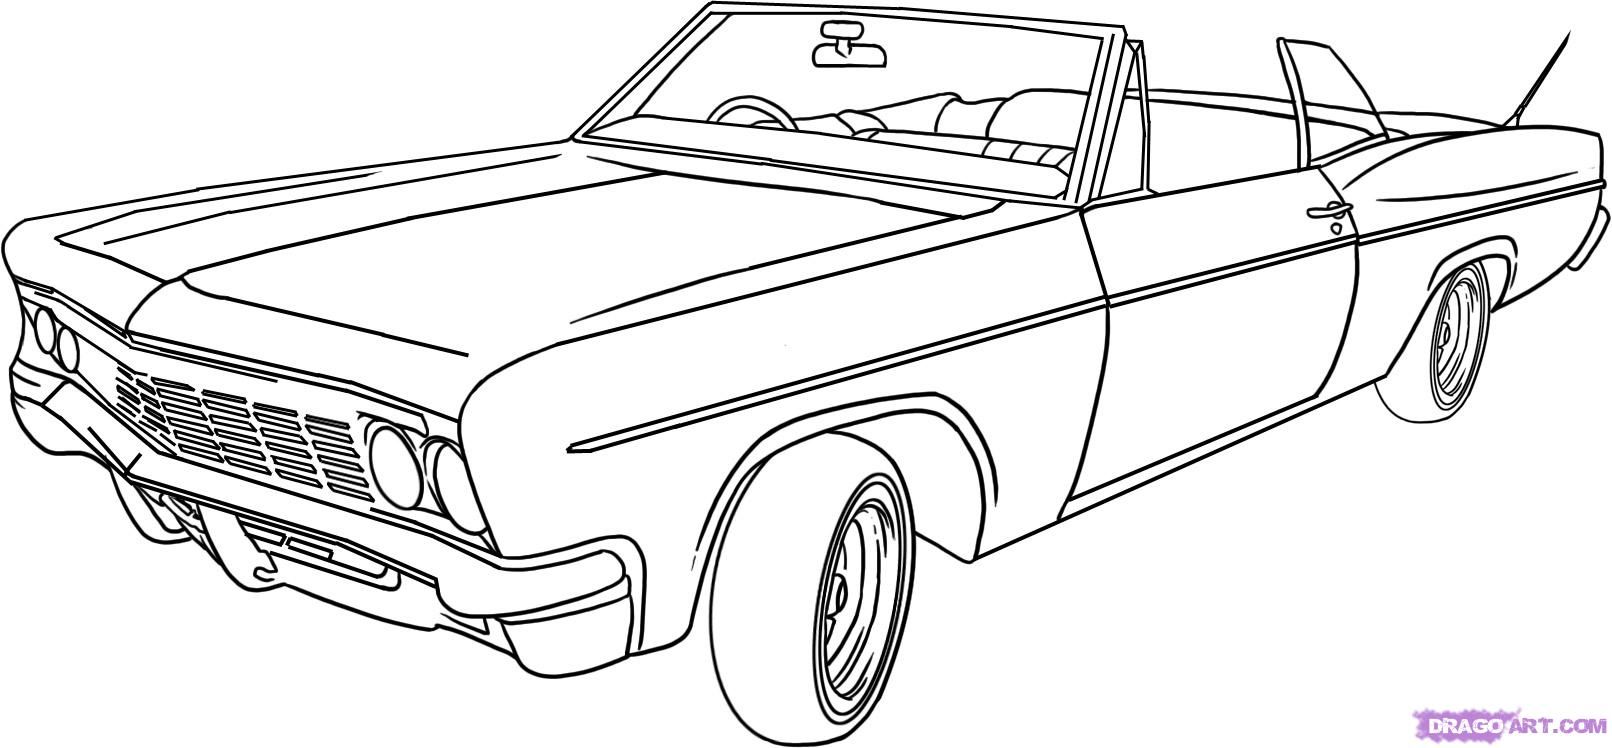 Lowrider Coloring Pages Coloring Home